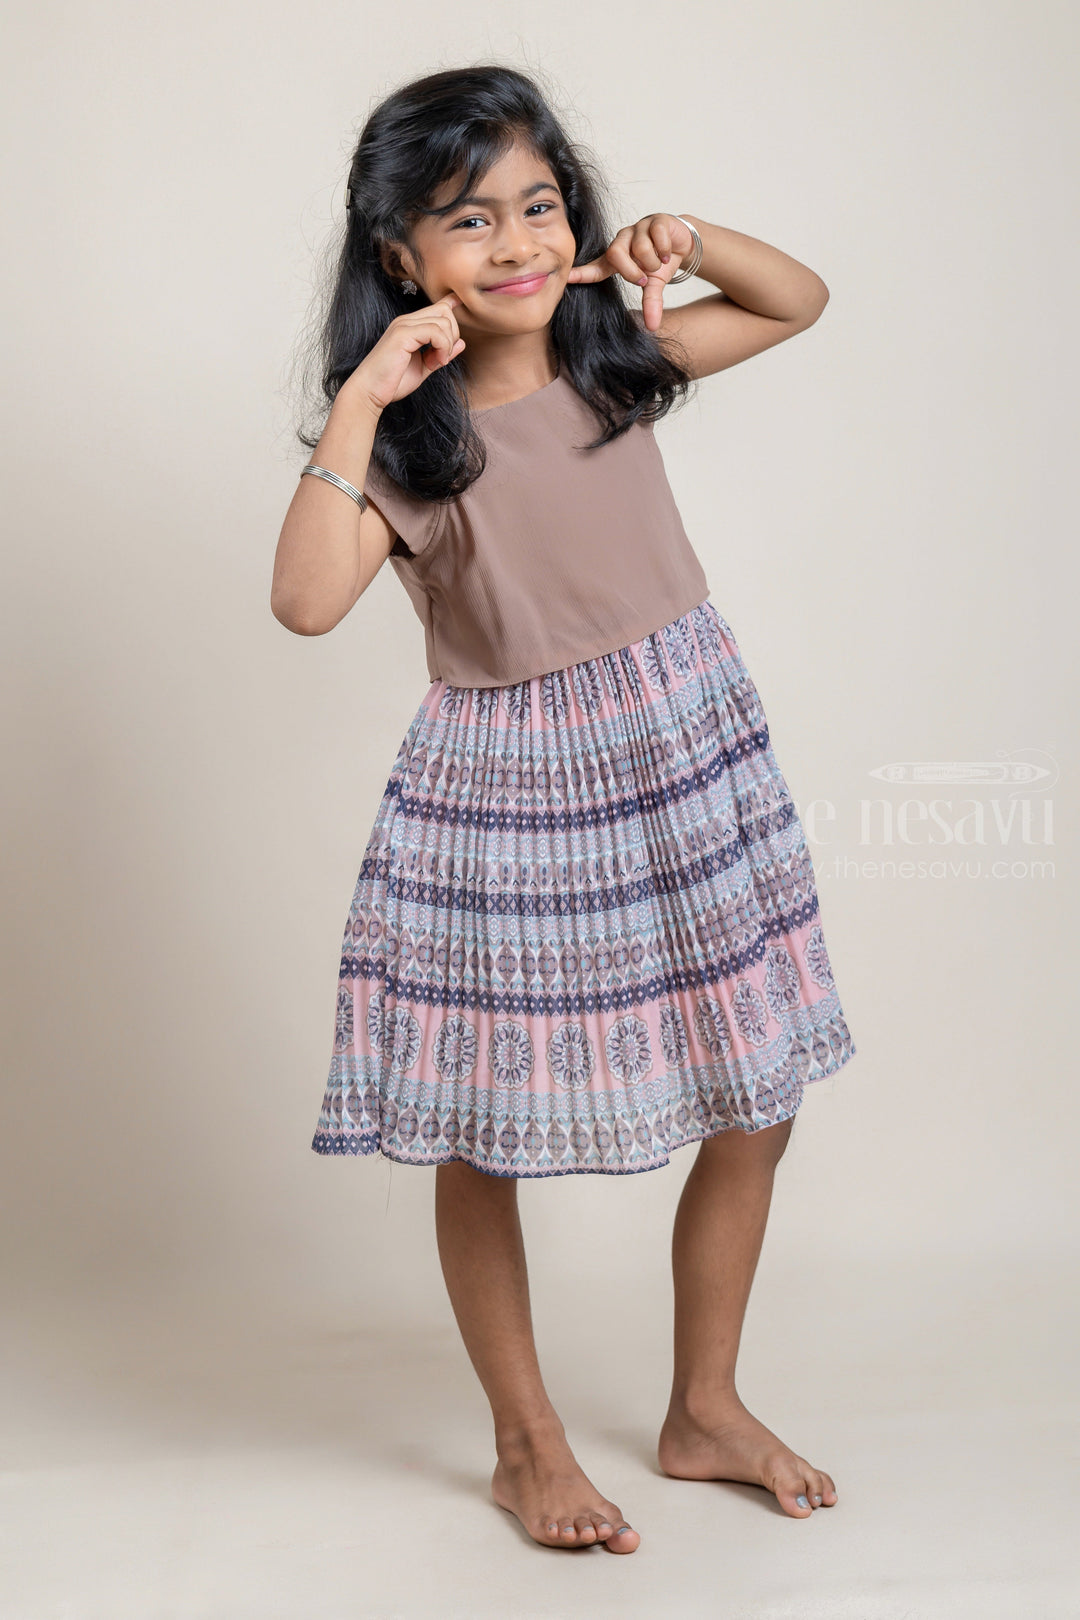 The Nesavu Girls Fancy Frock Salmon Tiny Pleated Gorgette Brown Frock with Geometrical Stripe Print and Attached Jacket For Girls Nesavu 16 (1Y) / Brown / Chiffon GFC1096B-16 Salmon Tiny Pleated Gorgette Frock with Geometrical Stripe Print and Attached Jacket | Girls' Fashion | The Nesavu